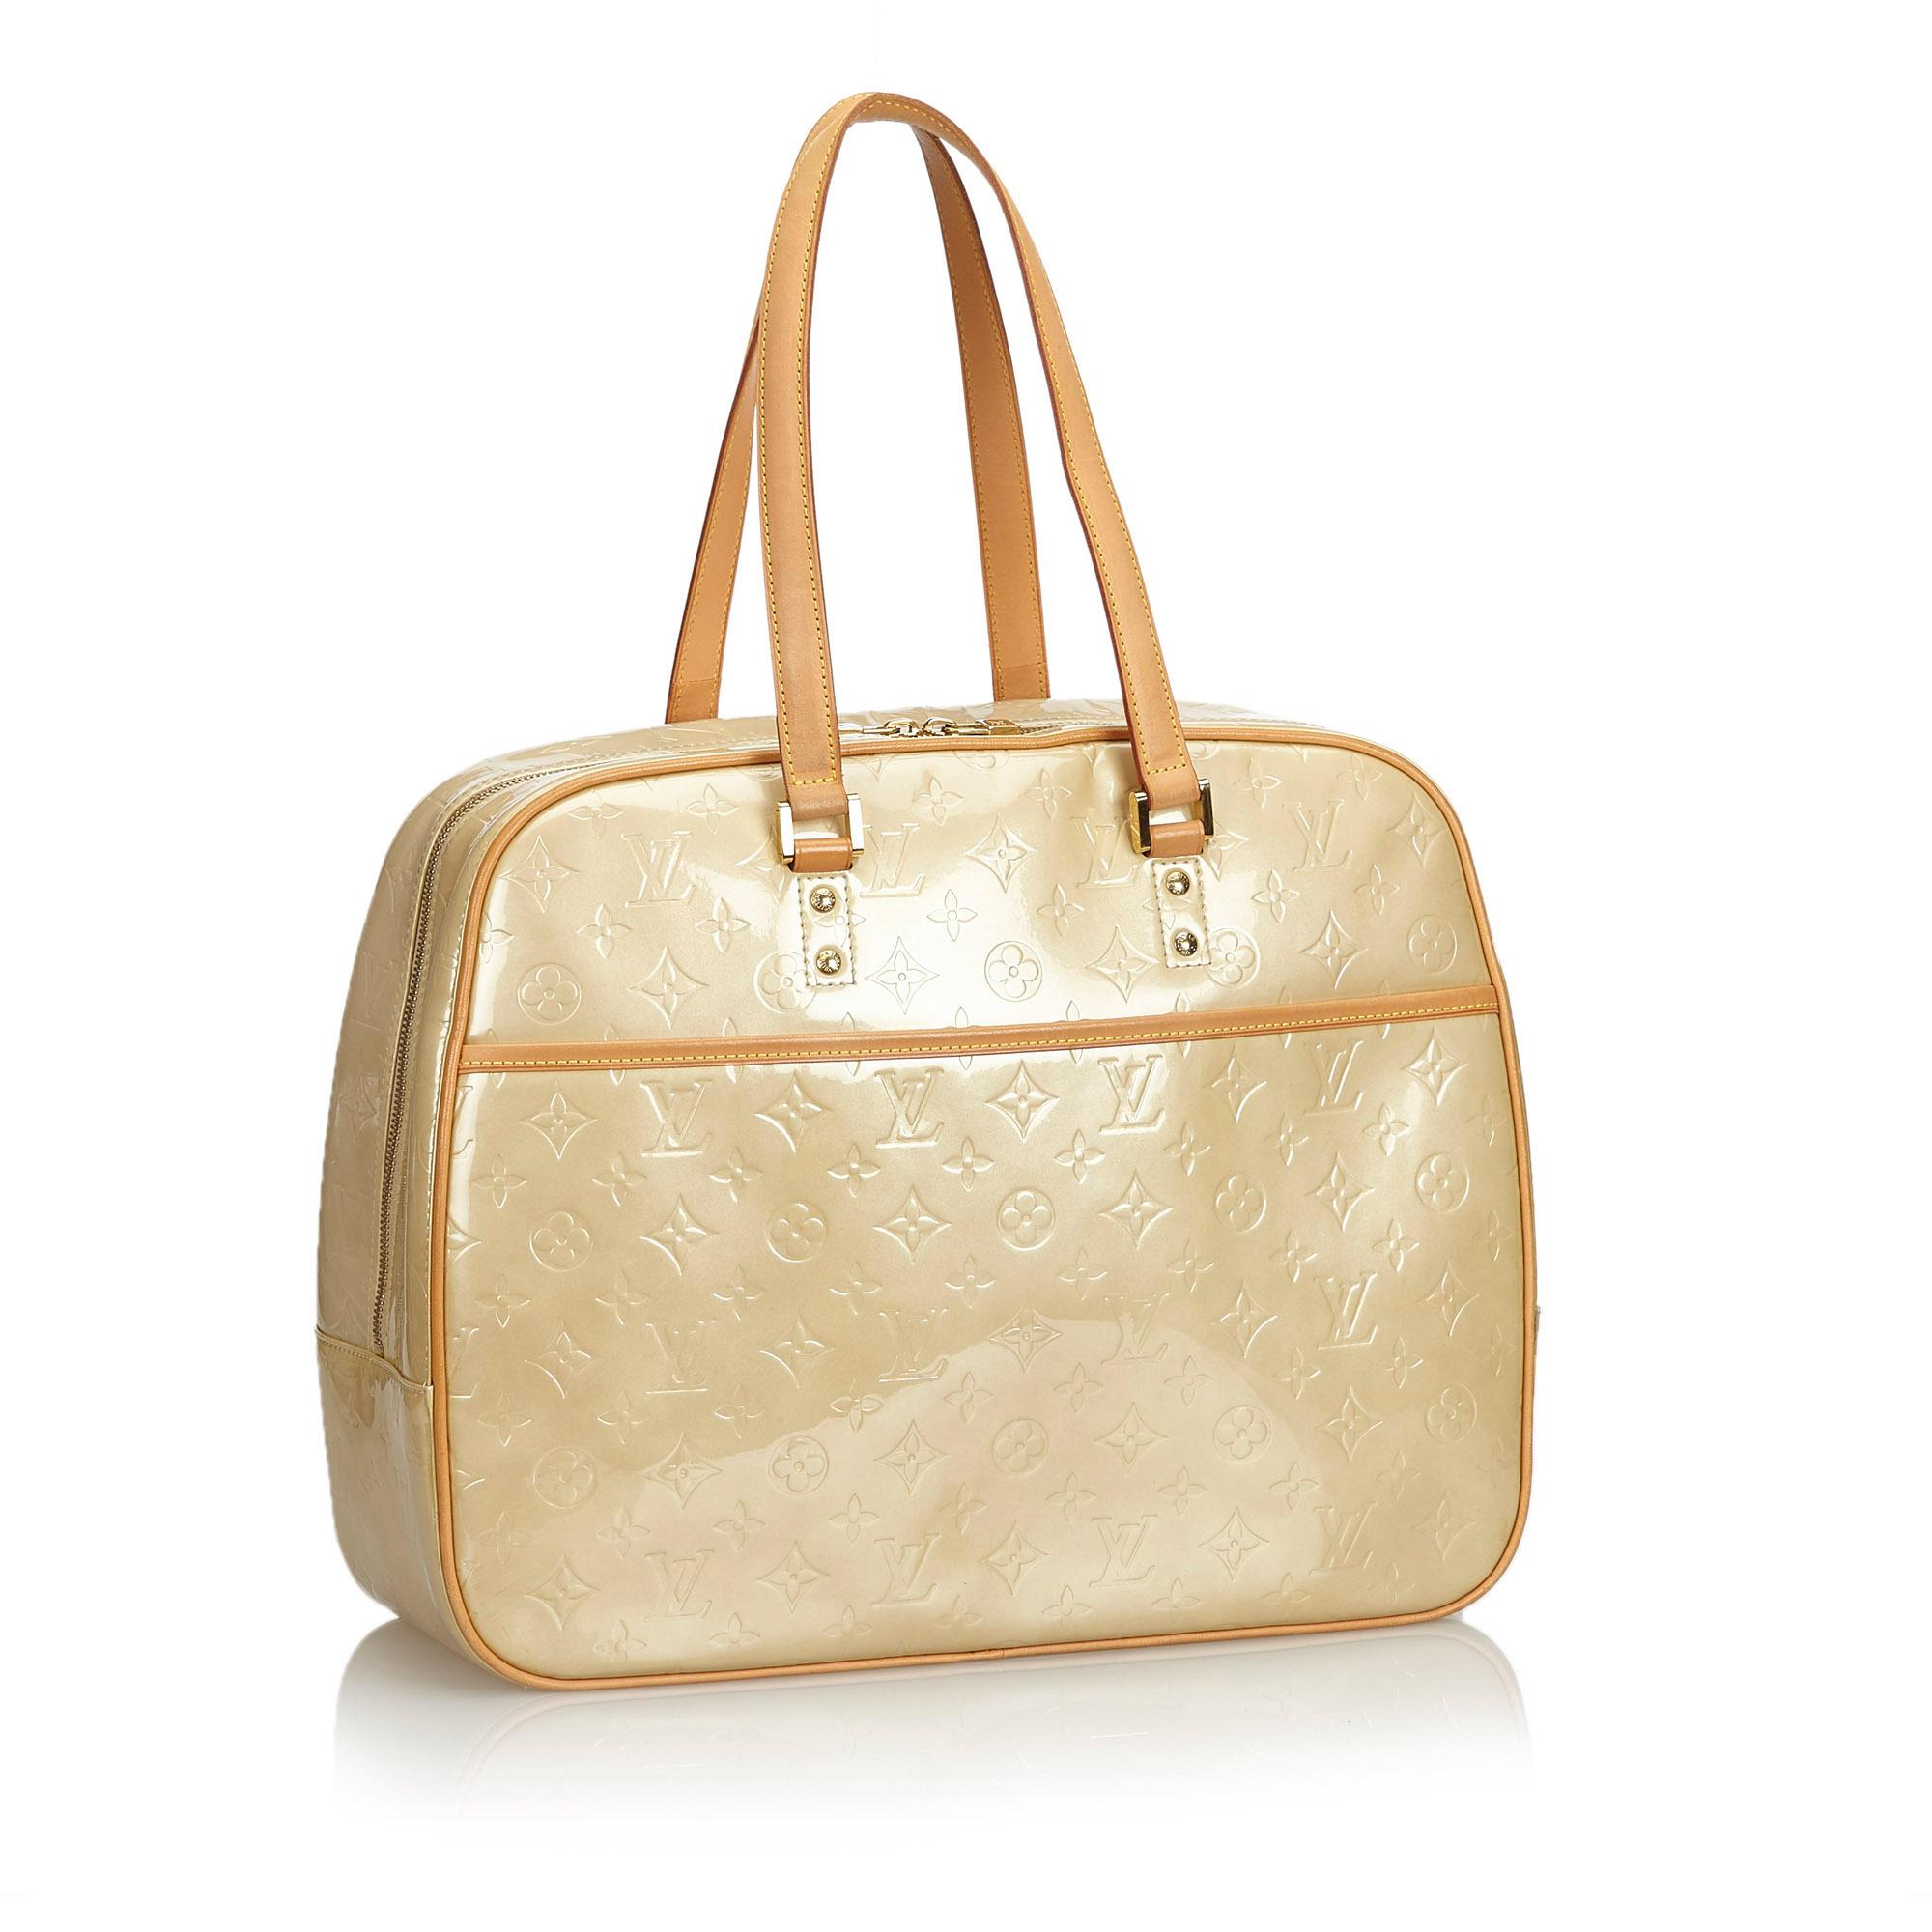 The Sutton features a vernis leather body, a front exterior slip pocket, flat leather straps, a two-way top zip closure, and interior slip pockets. It carries as B+ condition rating.

Inclusions: 
This item does not come with inclusions.


Louis